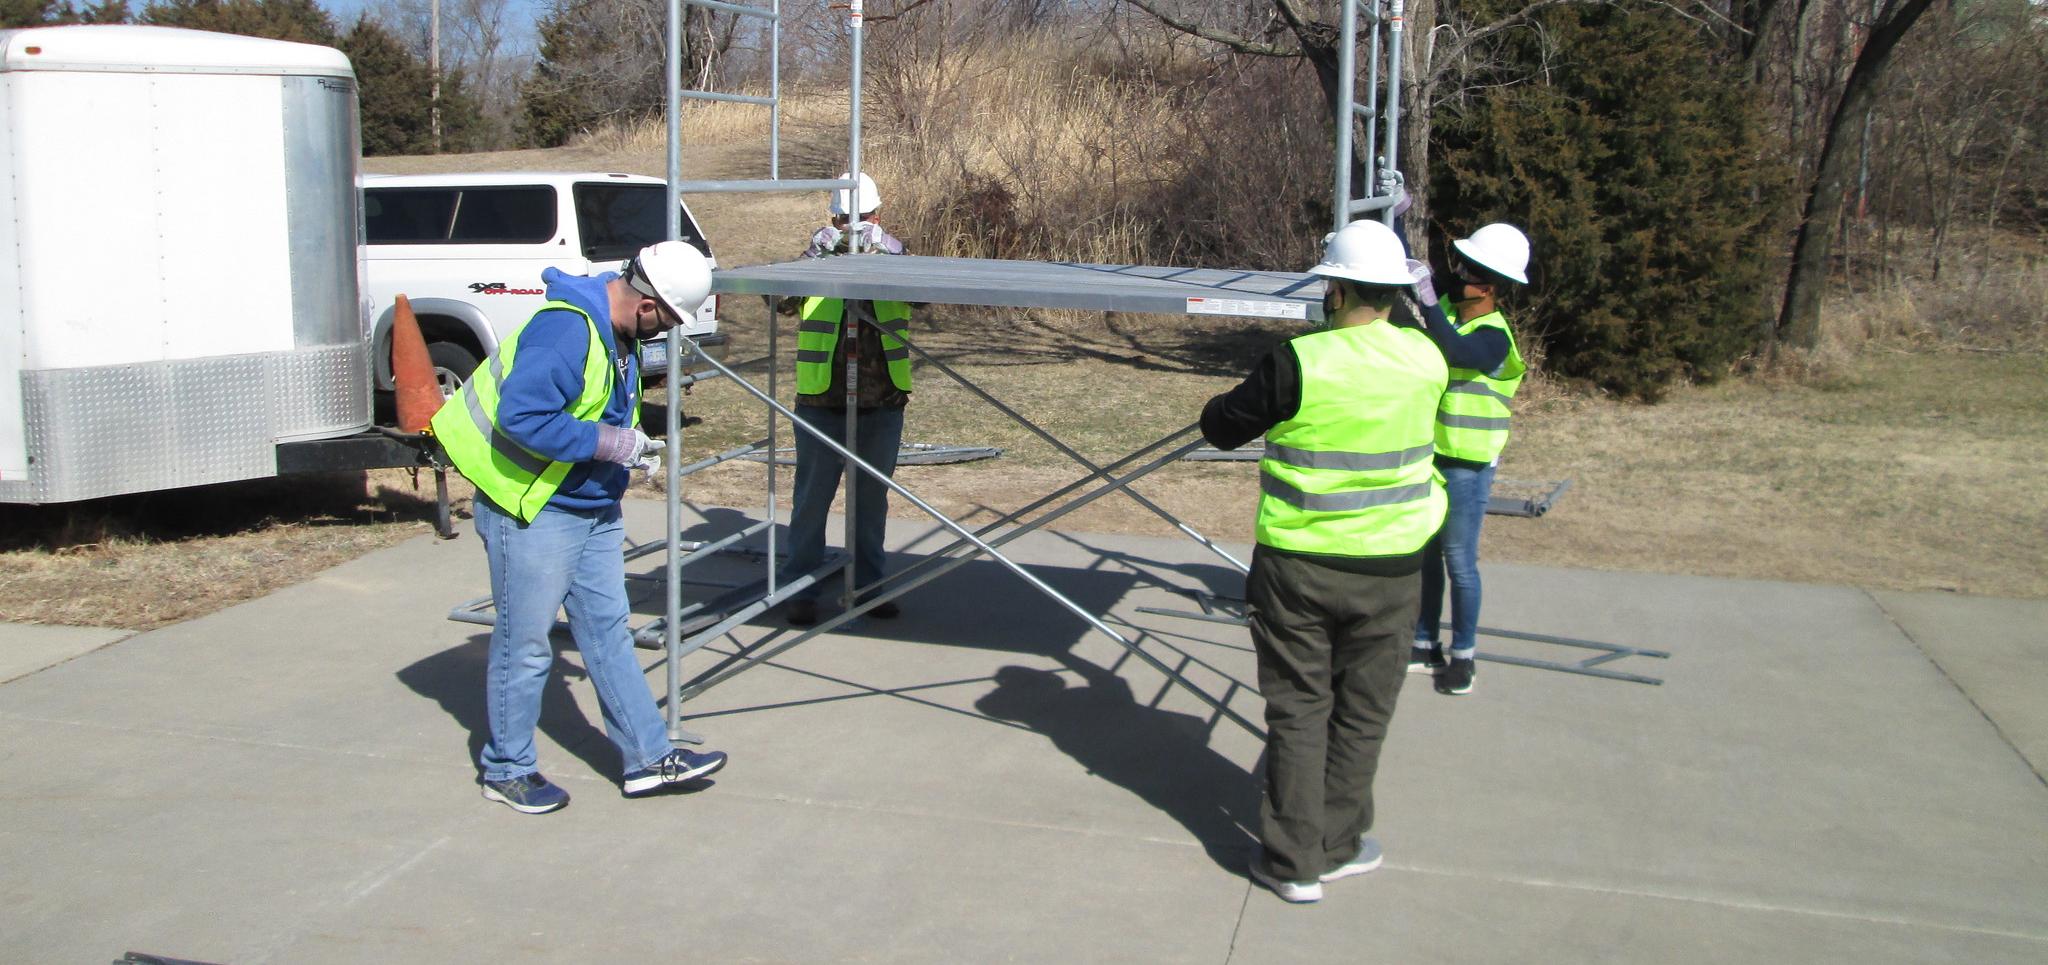 Fall Protection Class